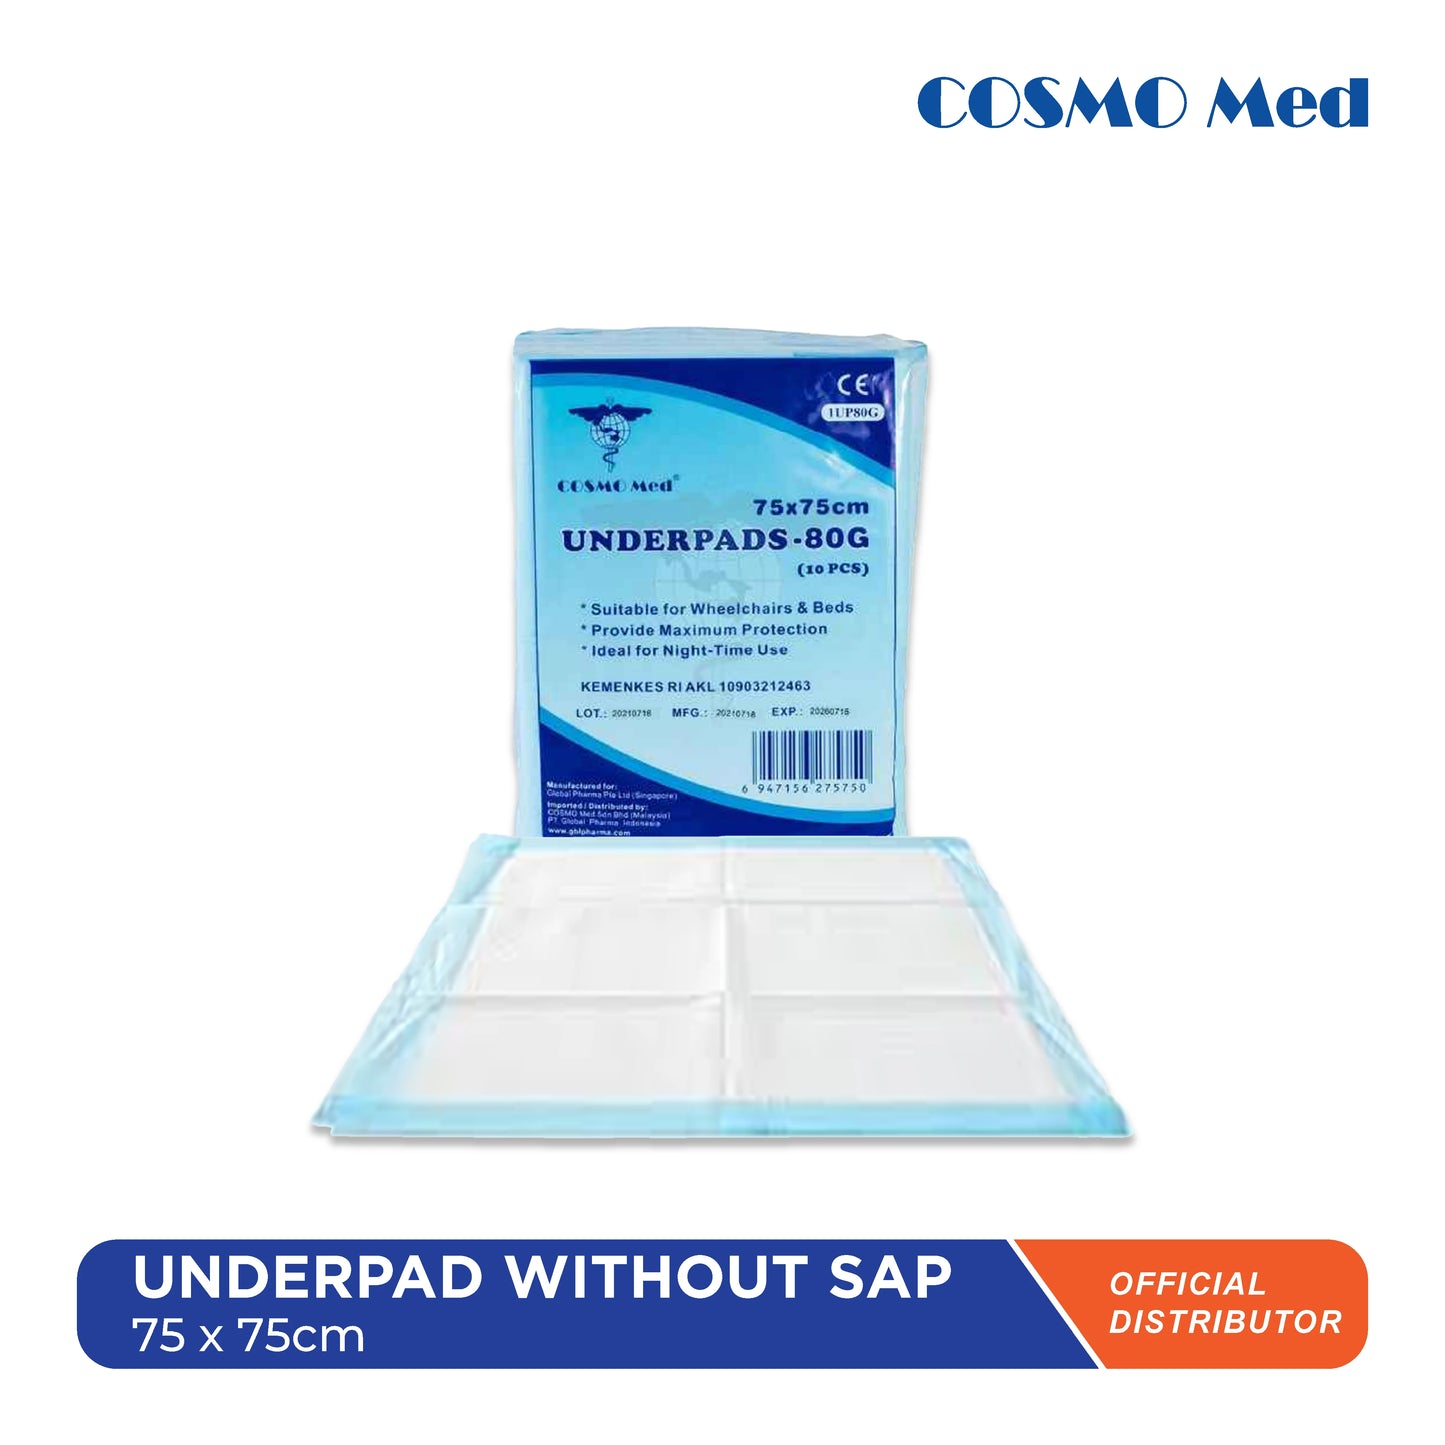 Underpad Without SAP